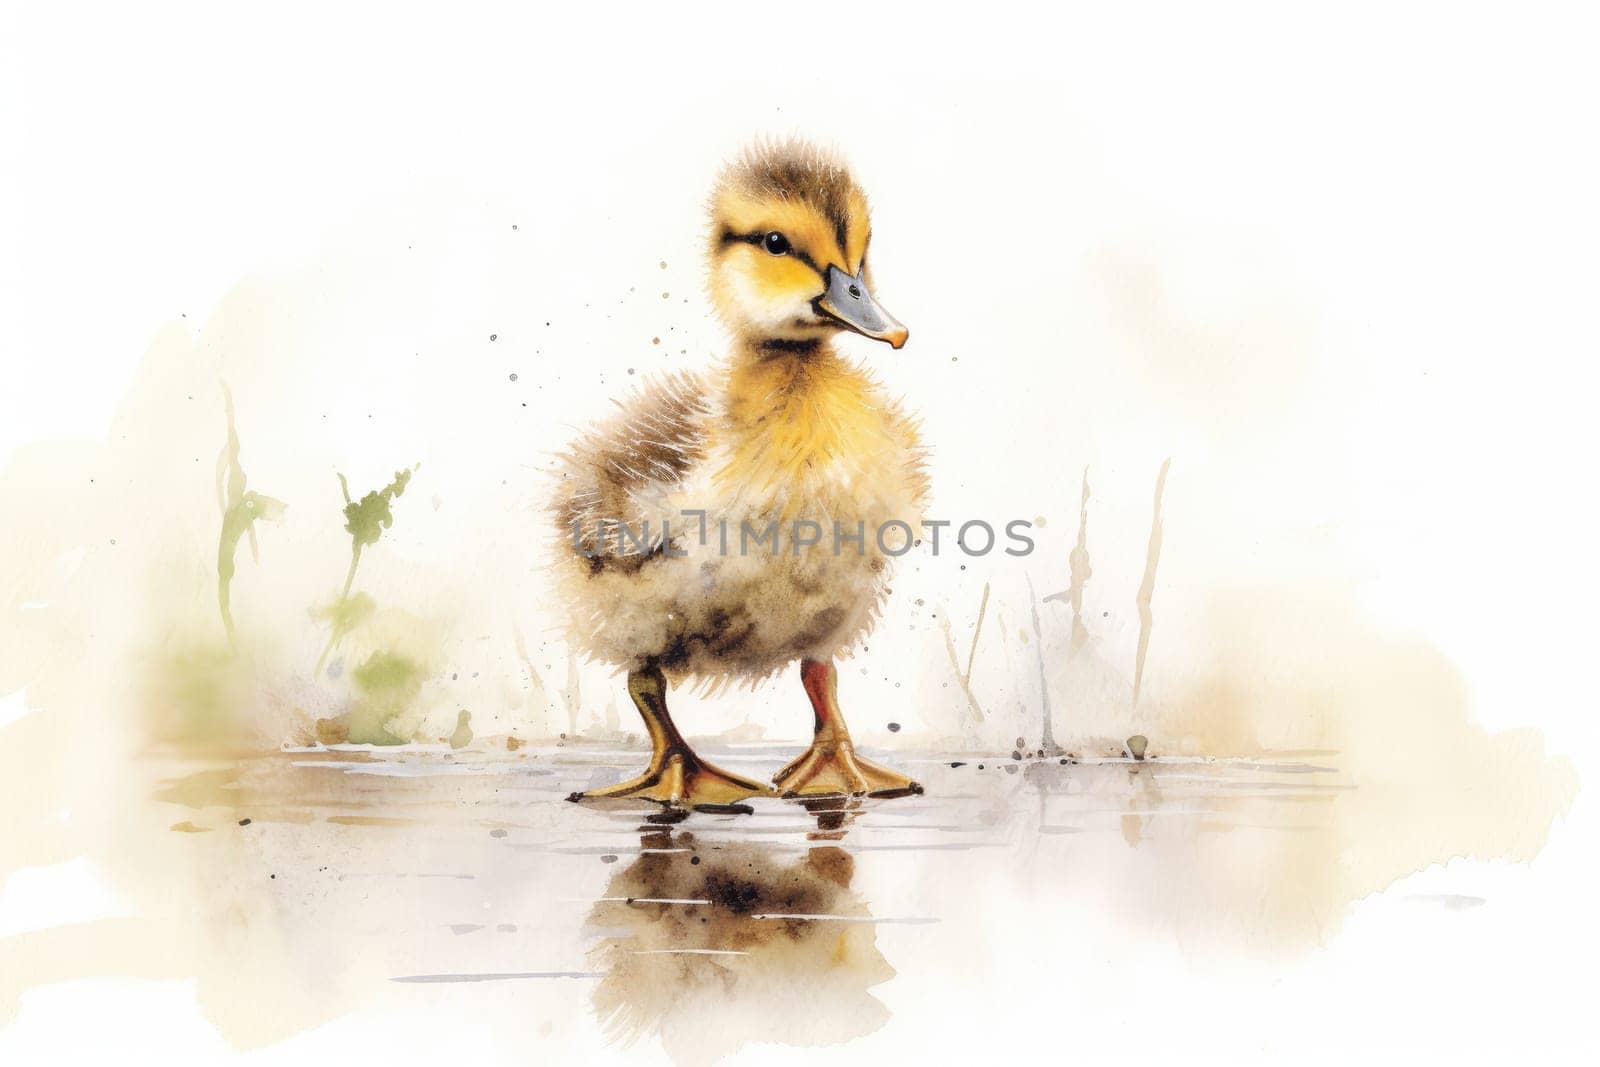 Watercolor painting of a duckling by MP_foto71